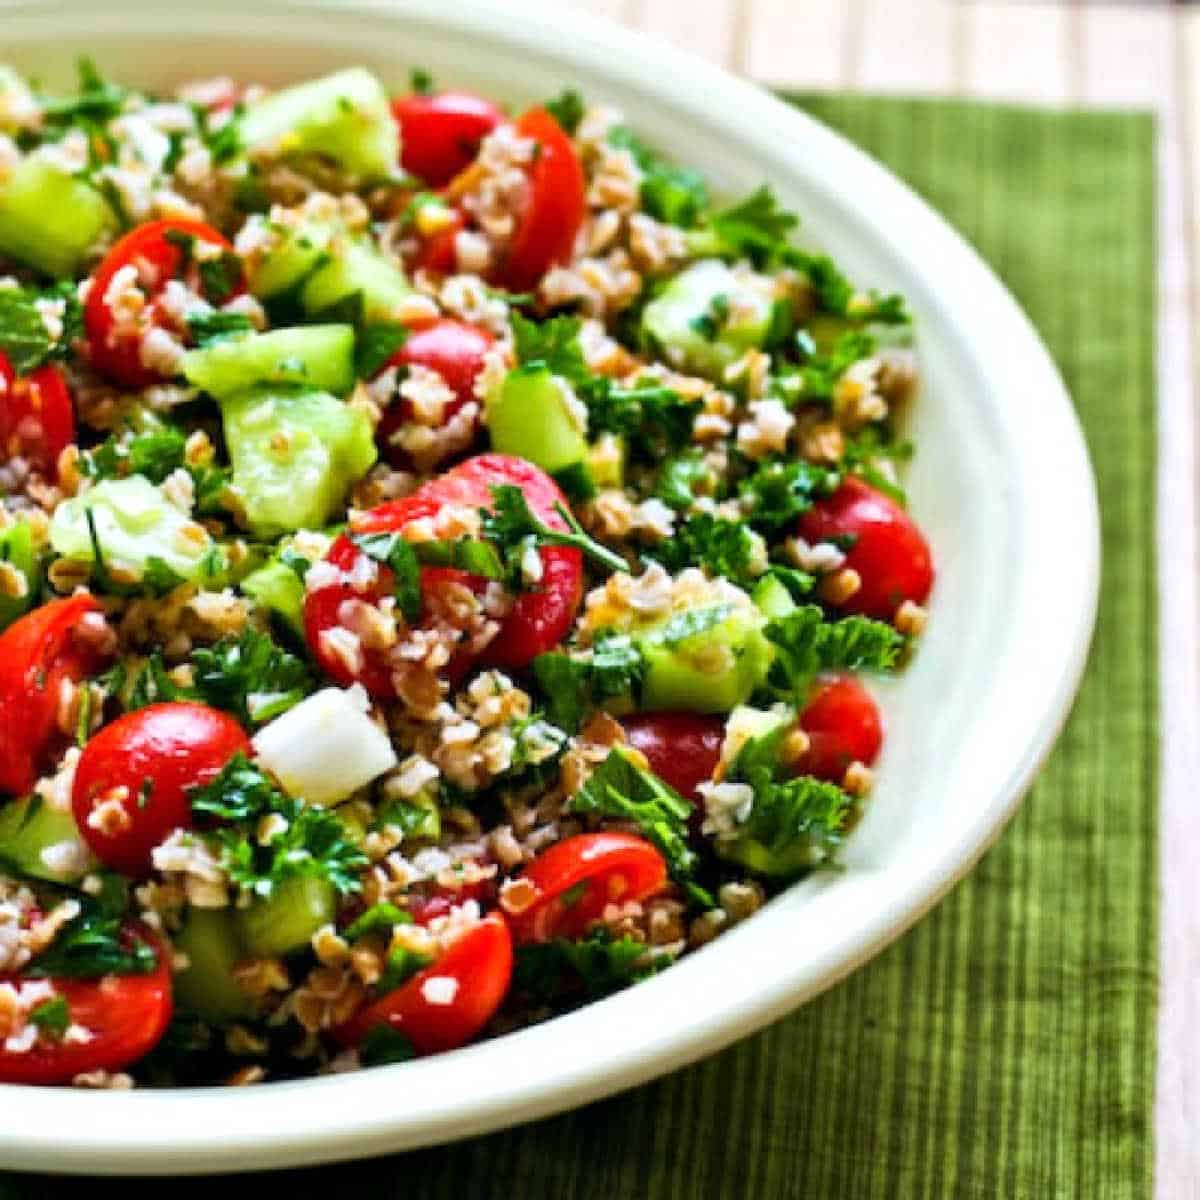 Bulgur Wheat Salad with Tomatoes, Cucumbers, Parsley, and Mint shown in serving bowl on green napkin.